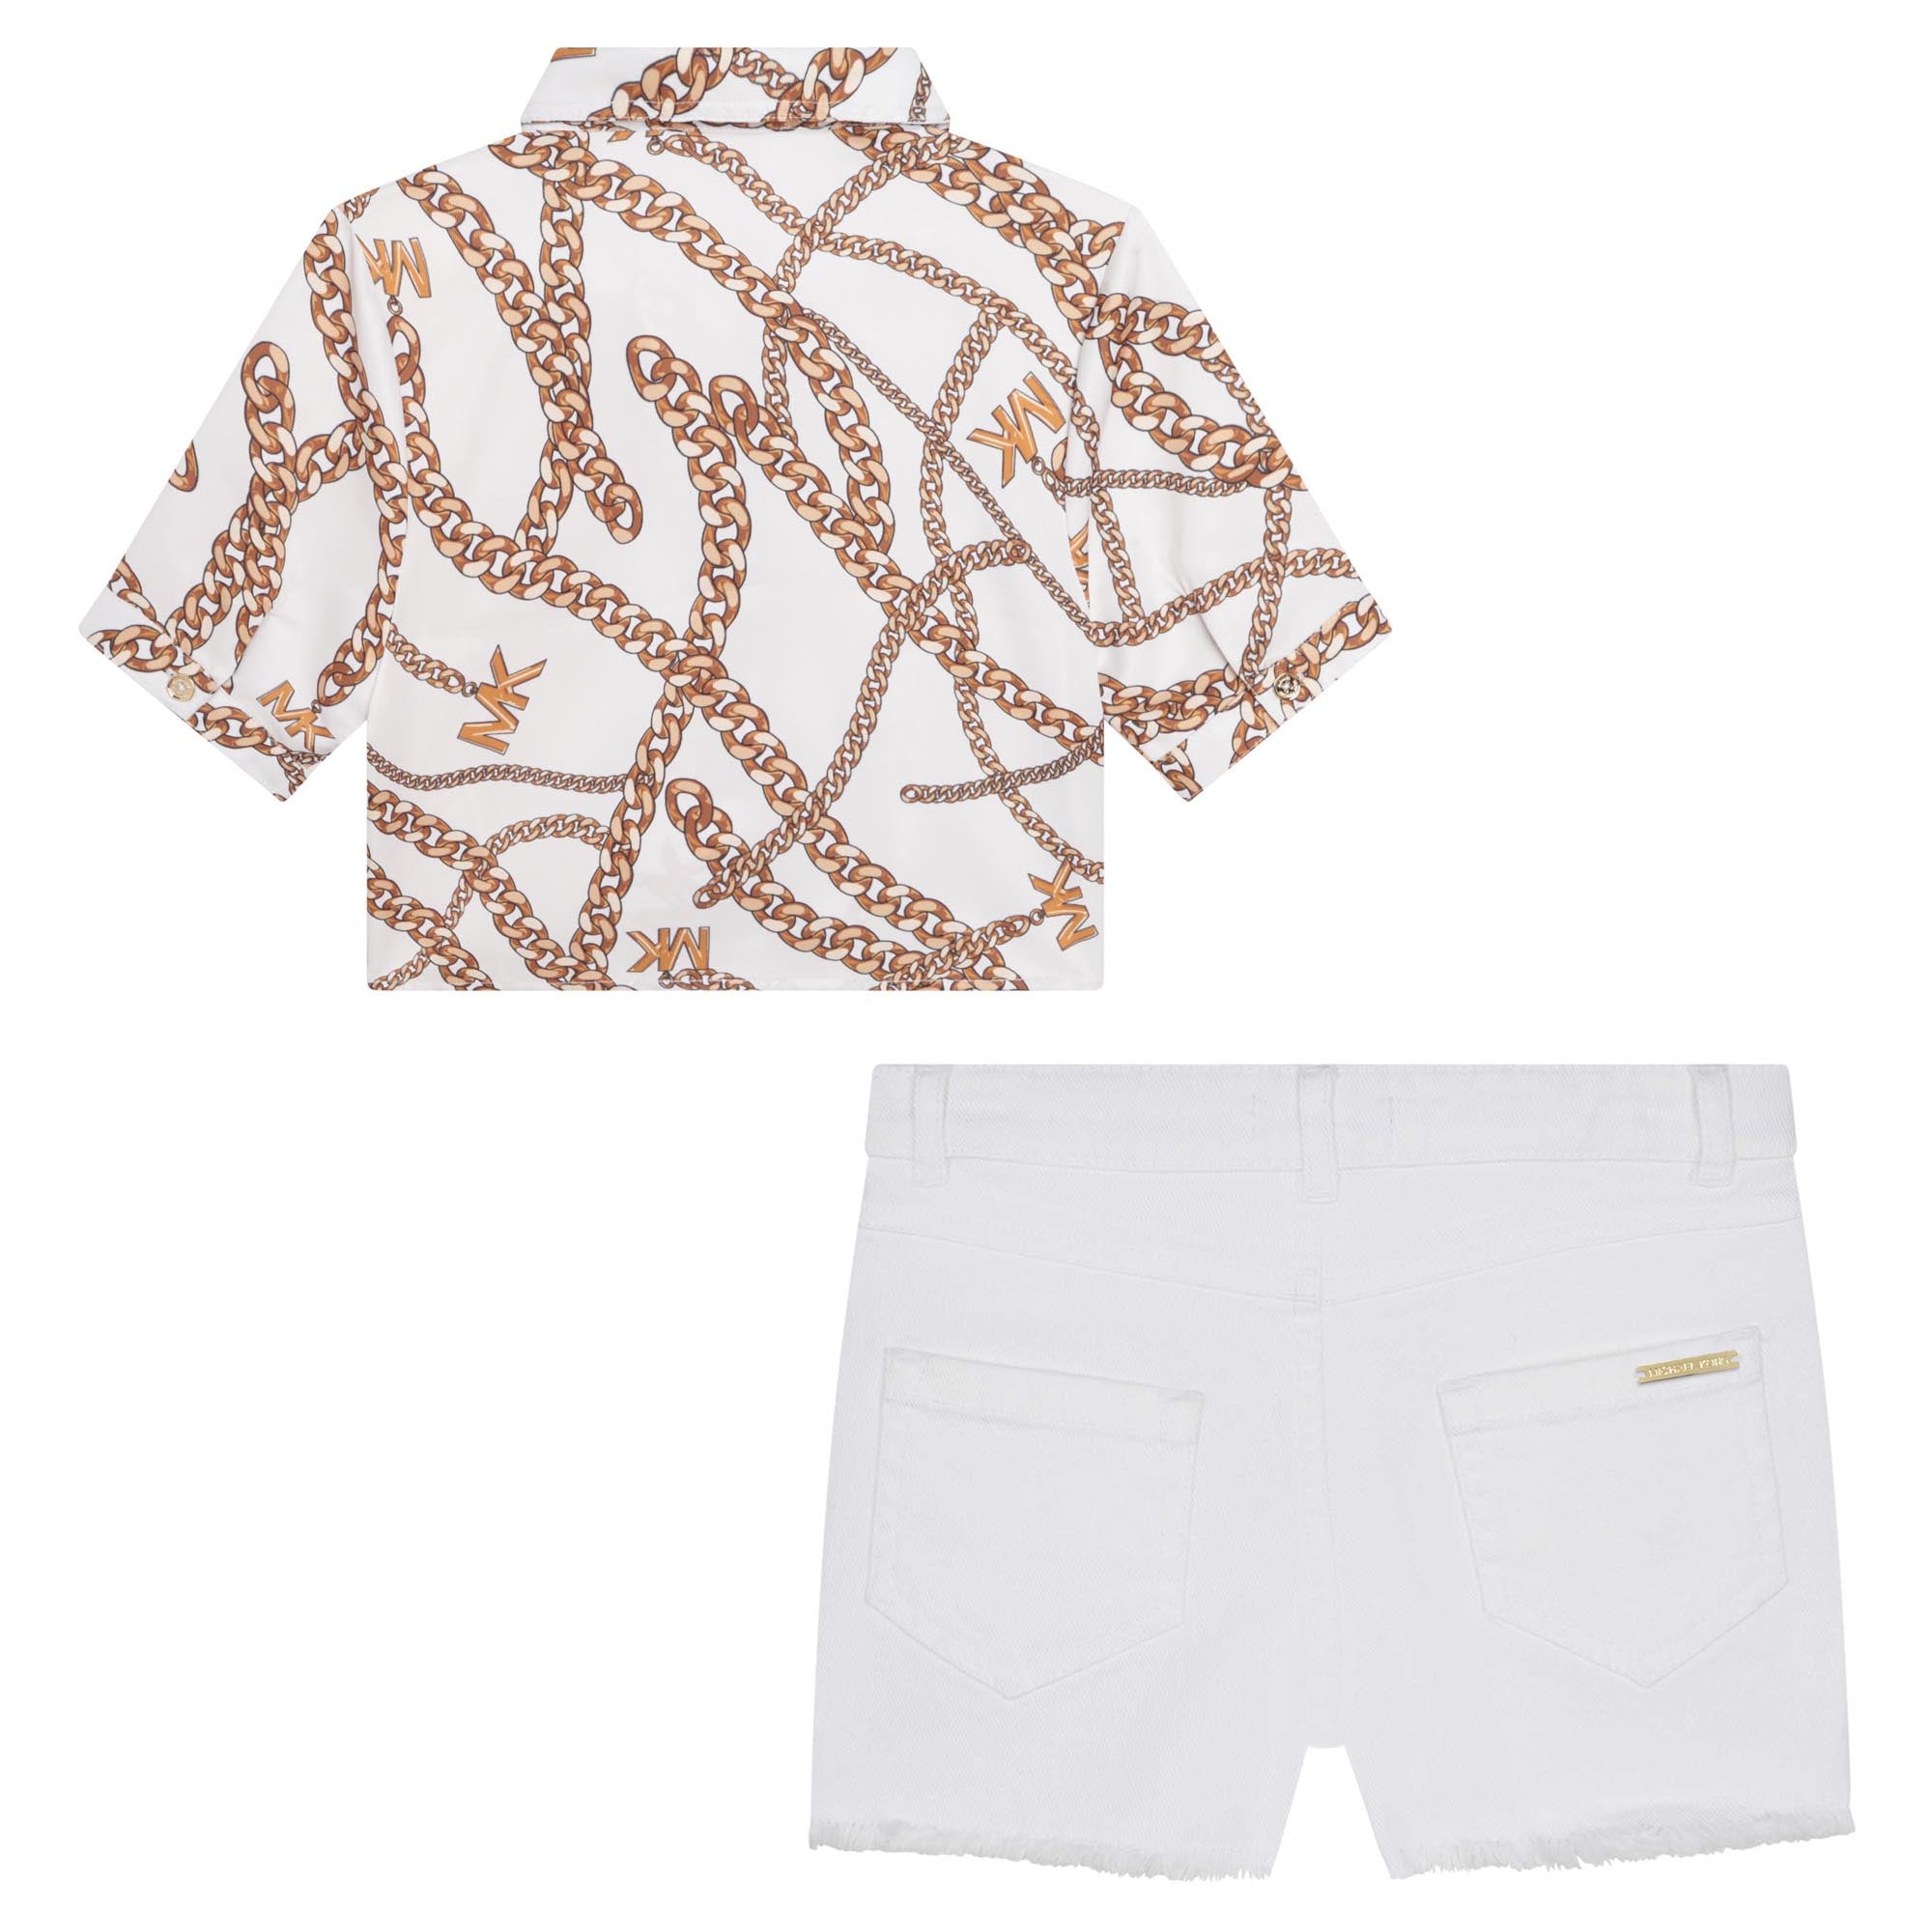 Michael Kors Chain Top and Shorts